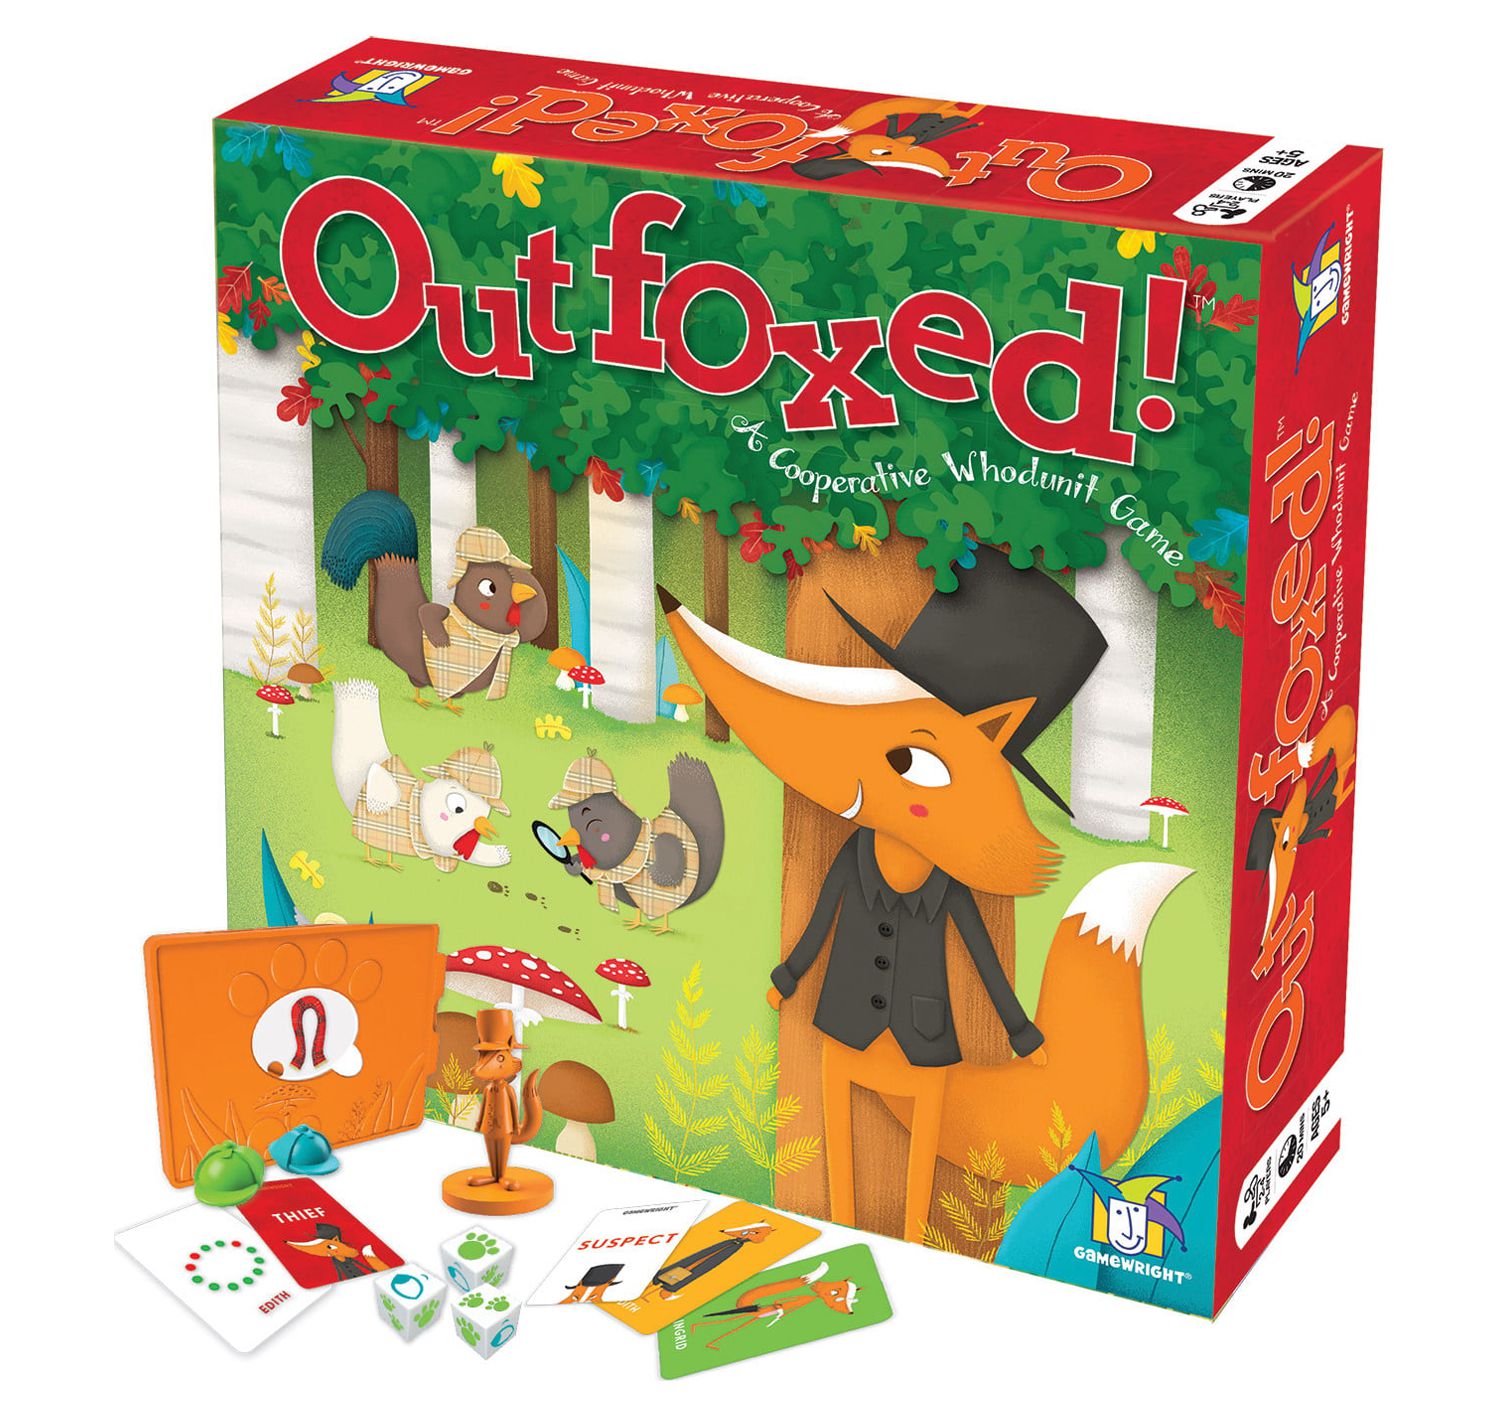 Outfoxed! Birthday Edition Board Game, by Gamewright - image 2 of 2